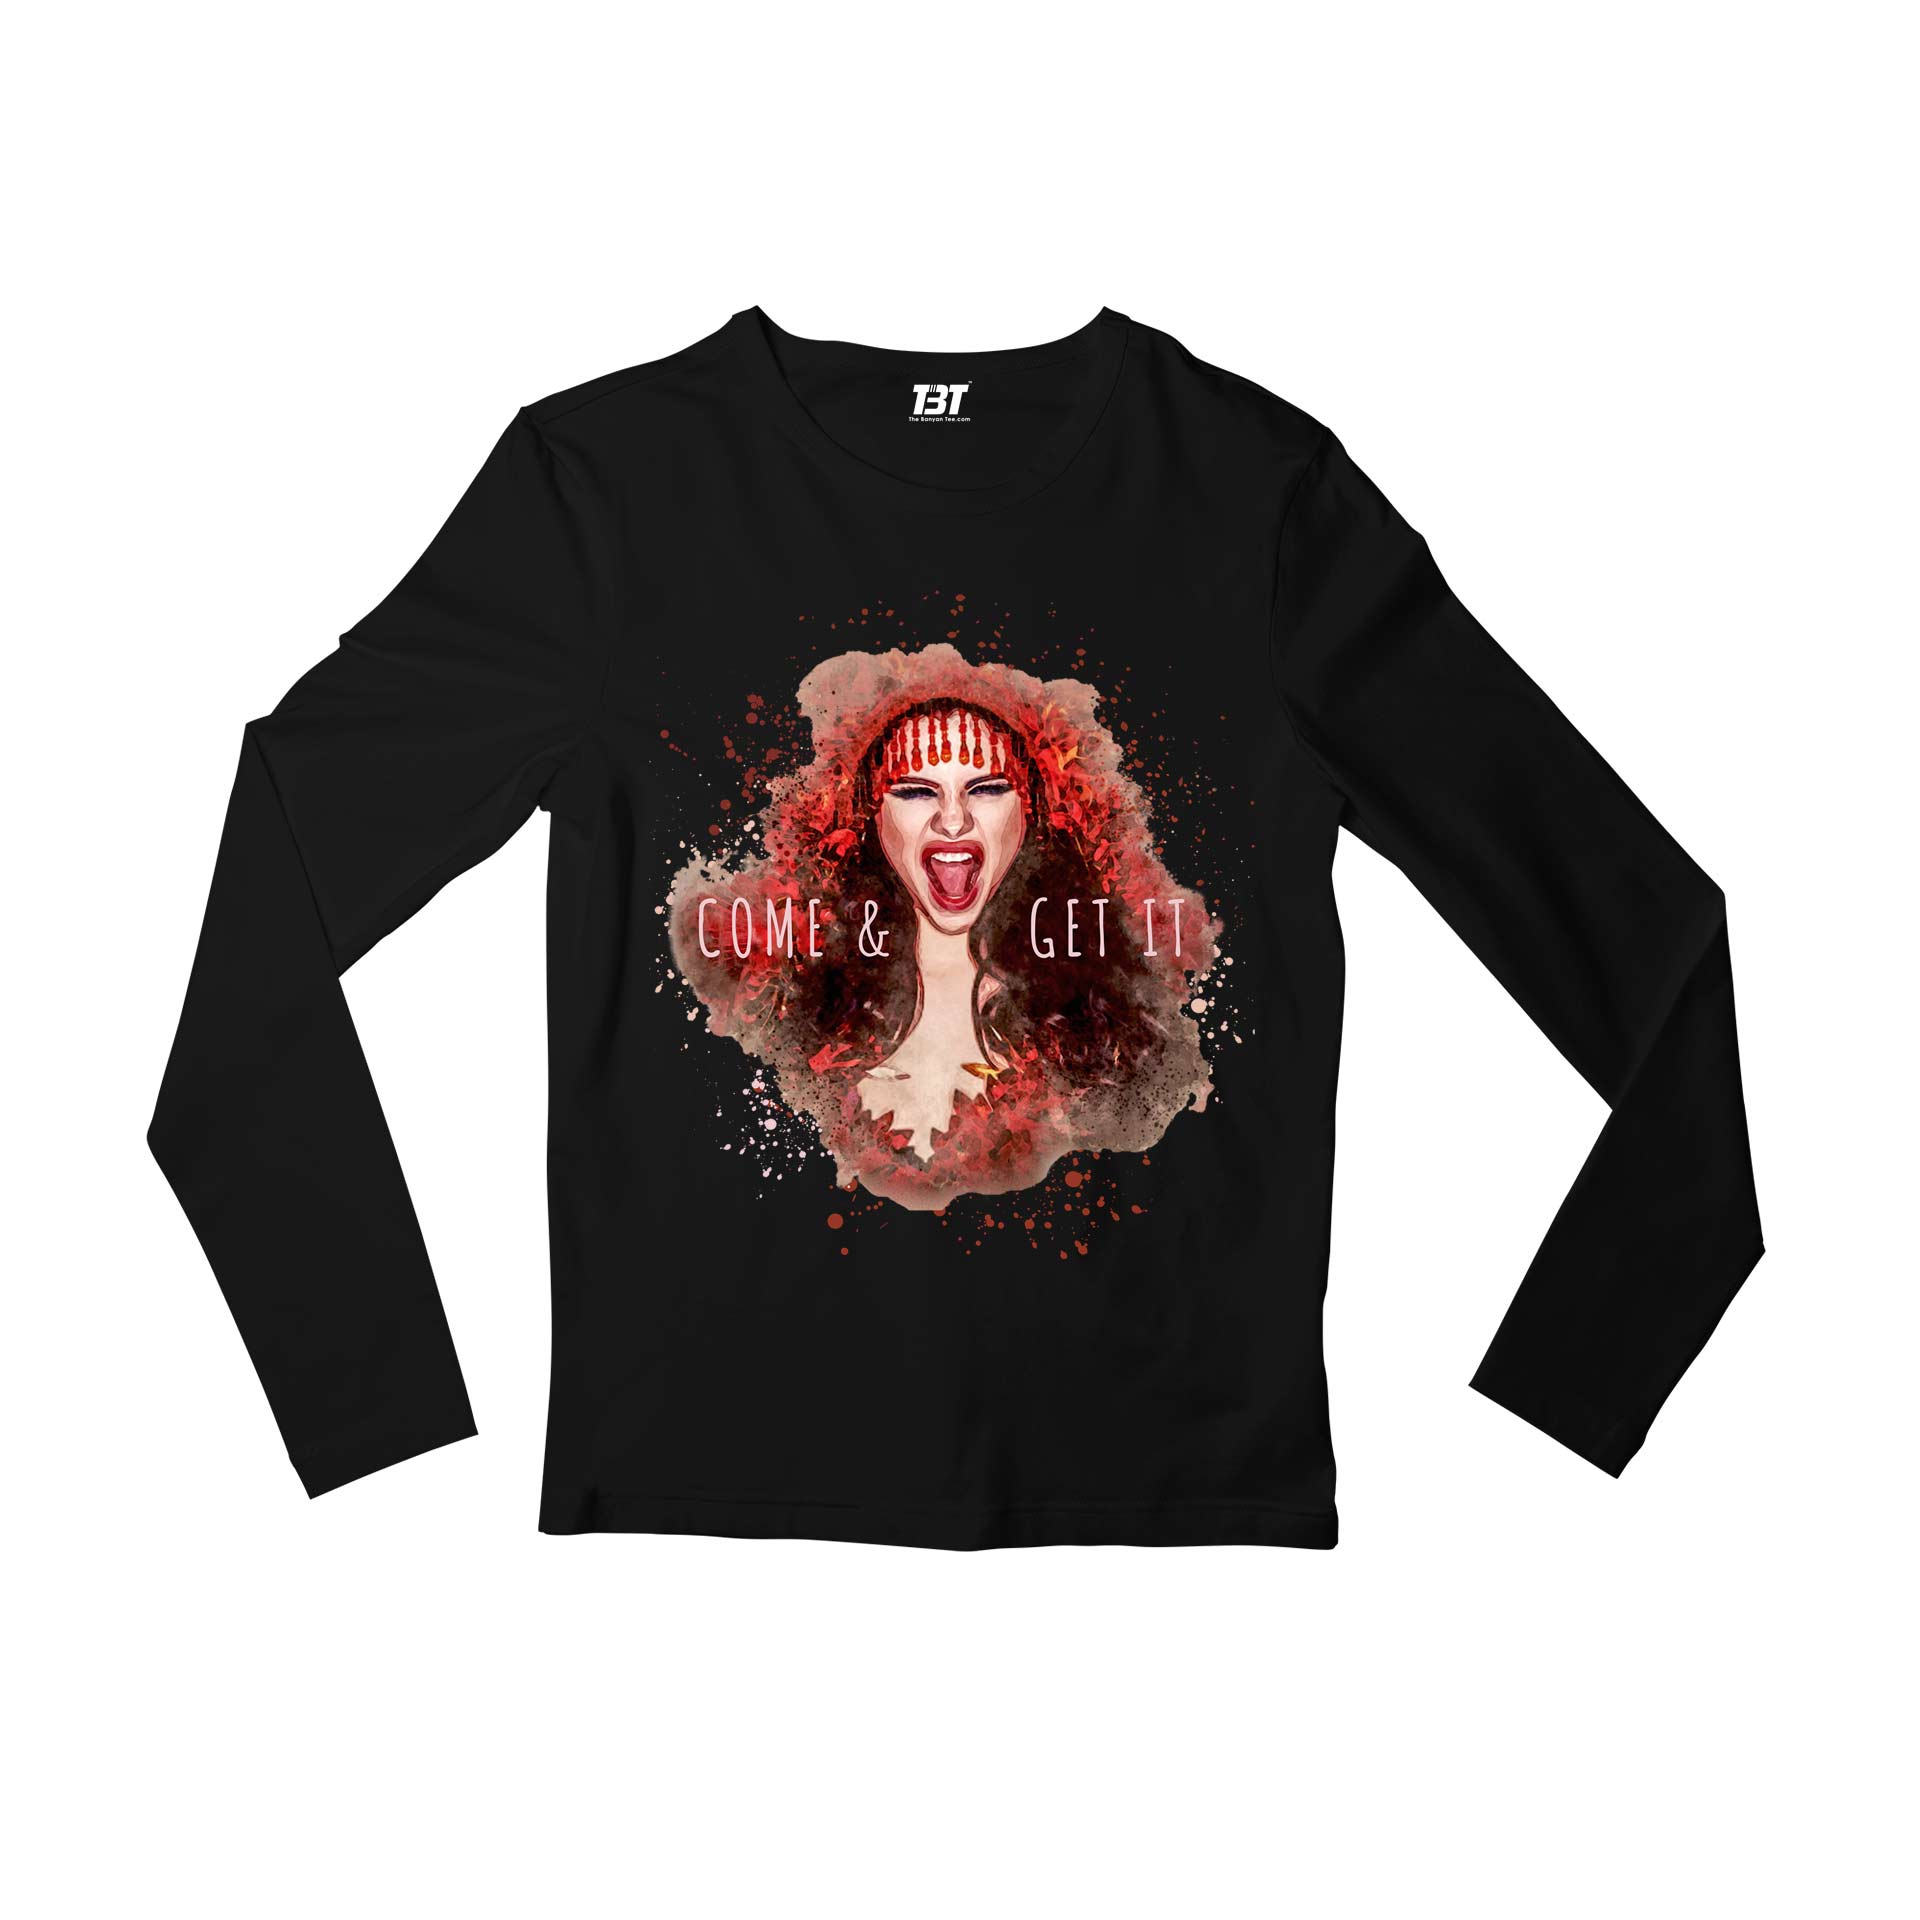 selena gomez come and get it full sleeves long sleeves music band buy online india the banyan tee tbt men women girls boys unisex black this love will be the death of me but i know i'll die happily